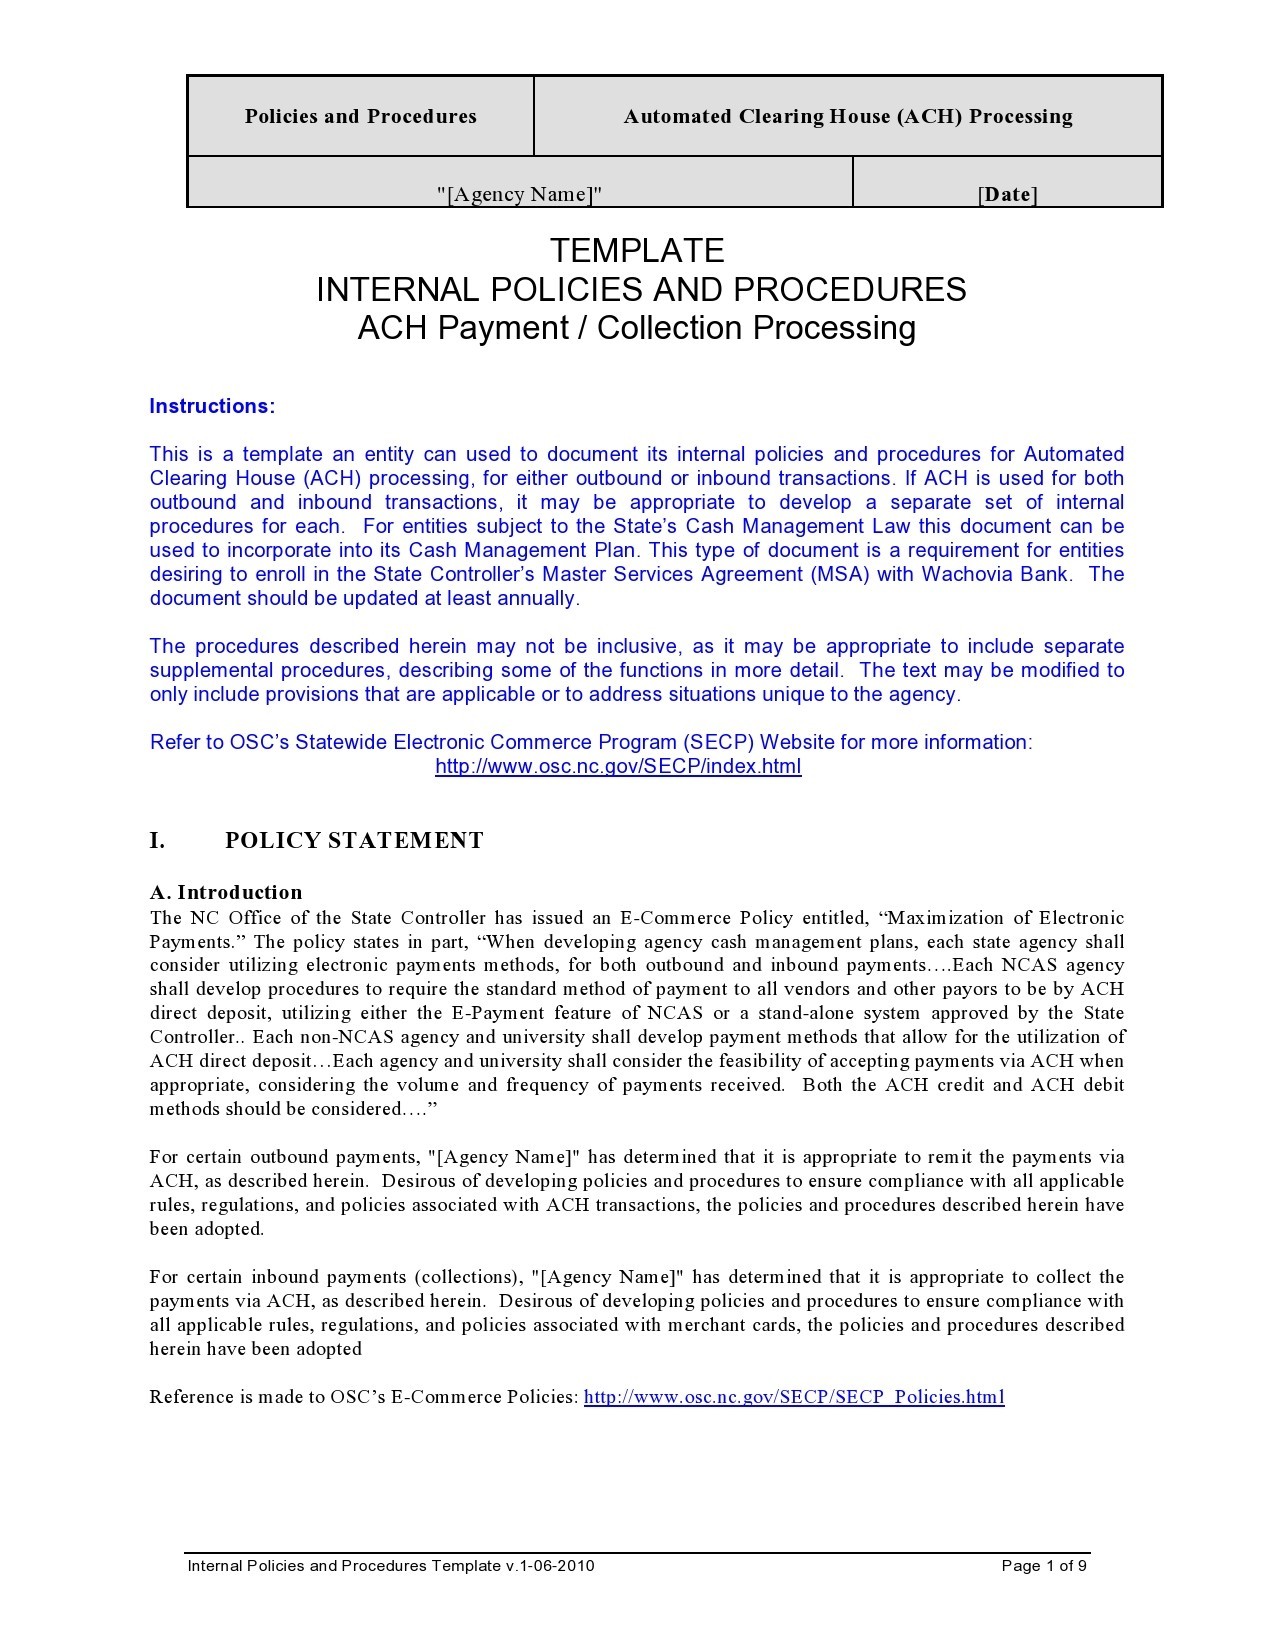 50 Free Policy And Procedure Templates Manuals TemplateLab